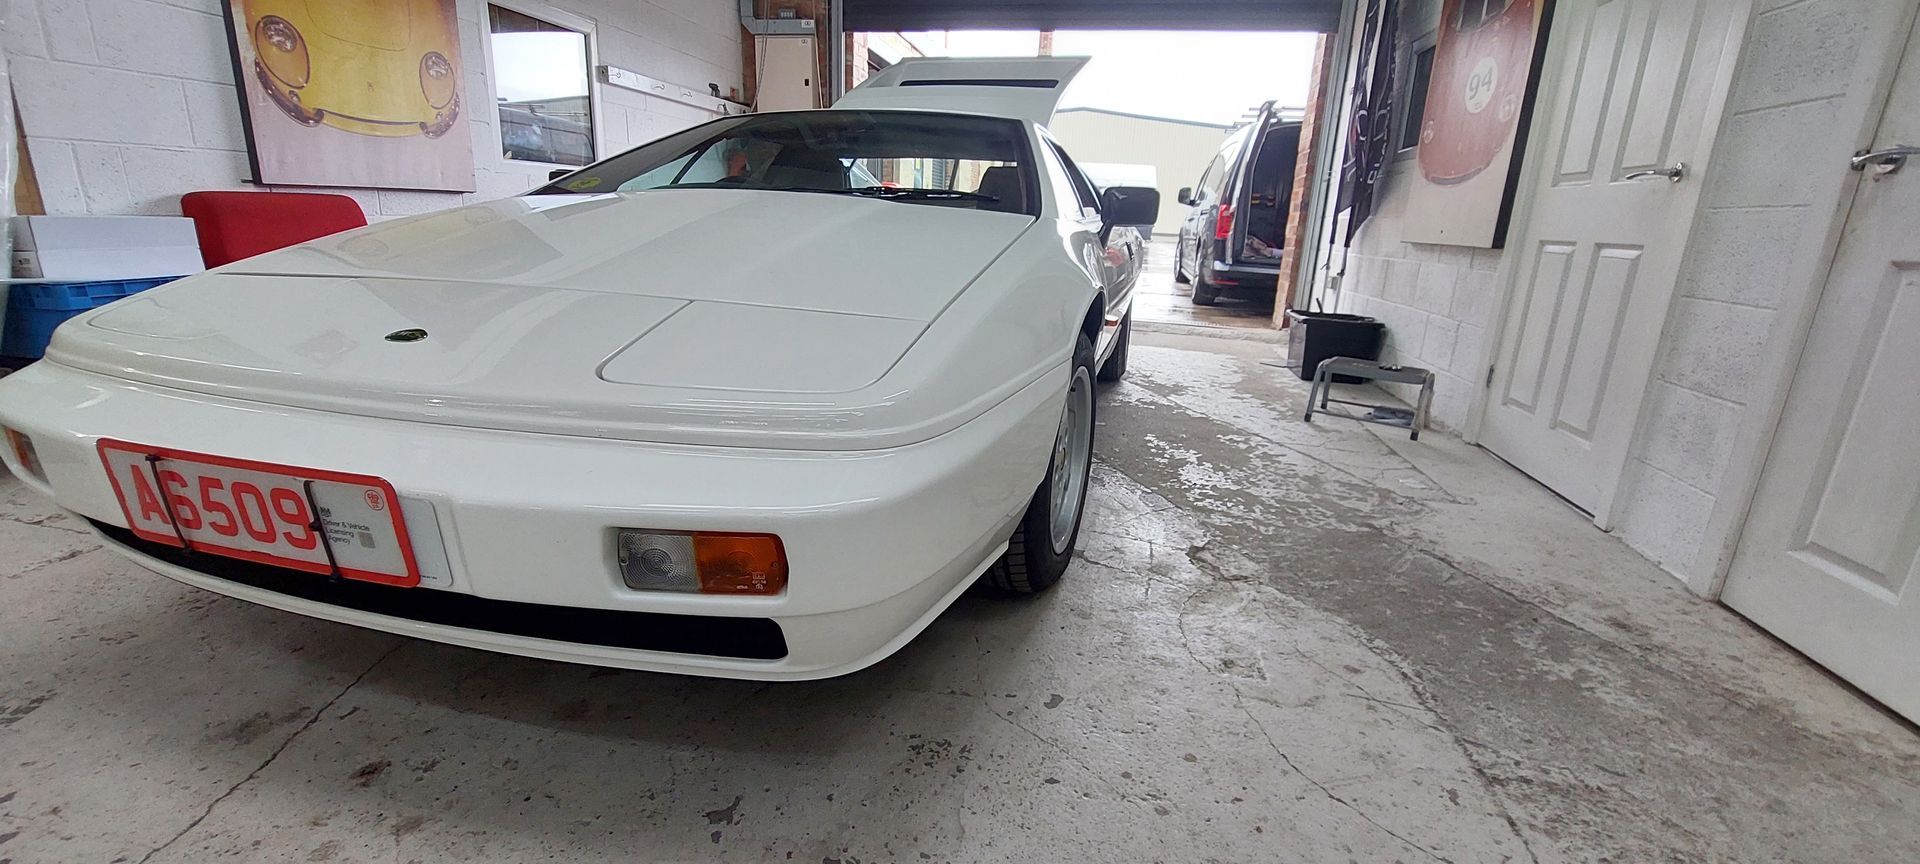 Lotus Esprit S3 - Tuning by AG Classic Car Tuning